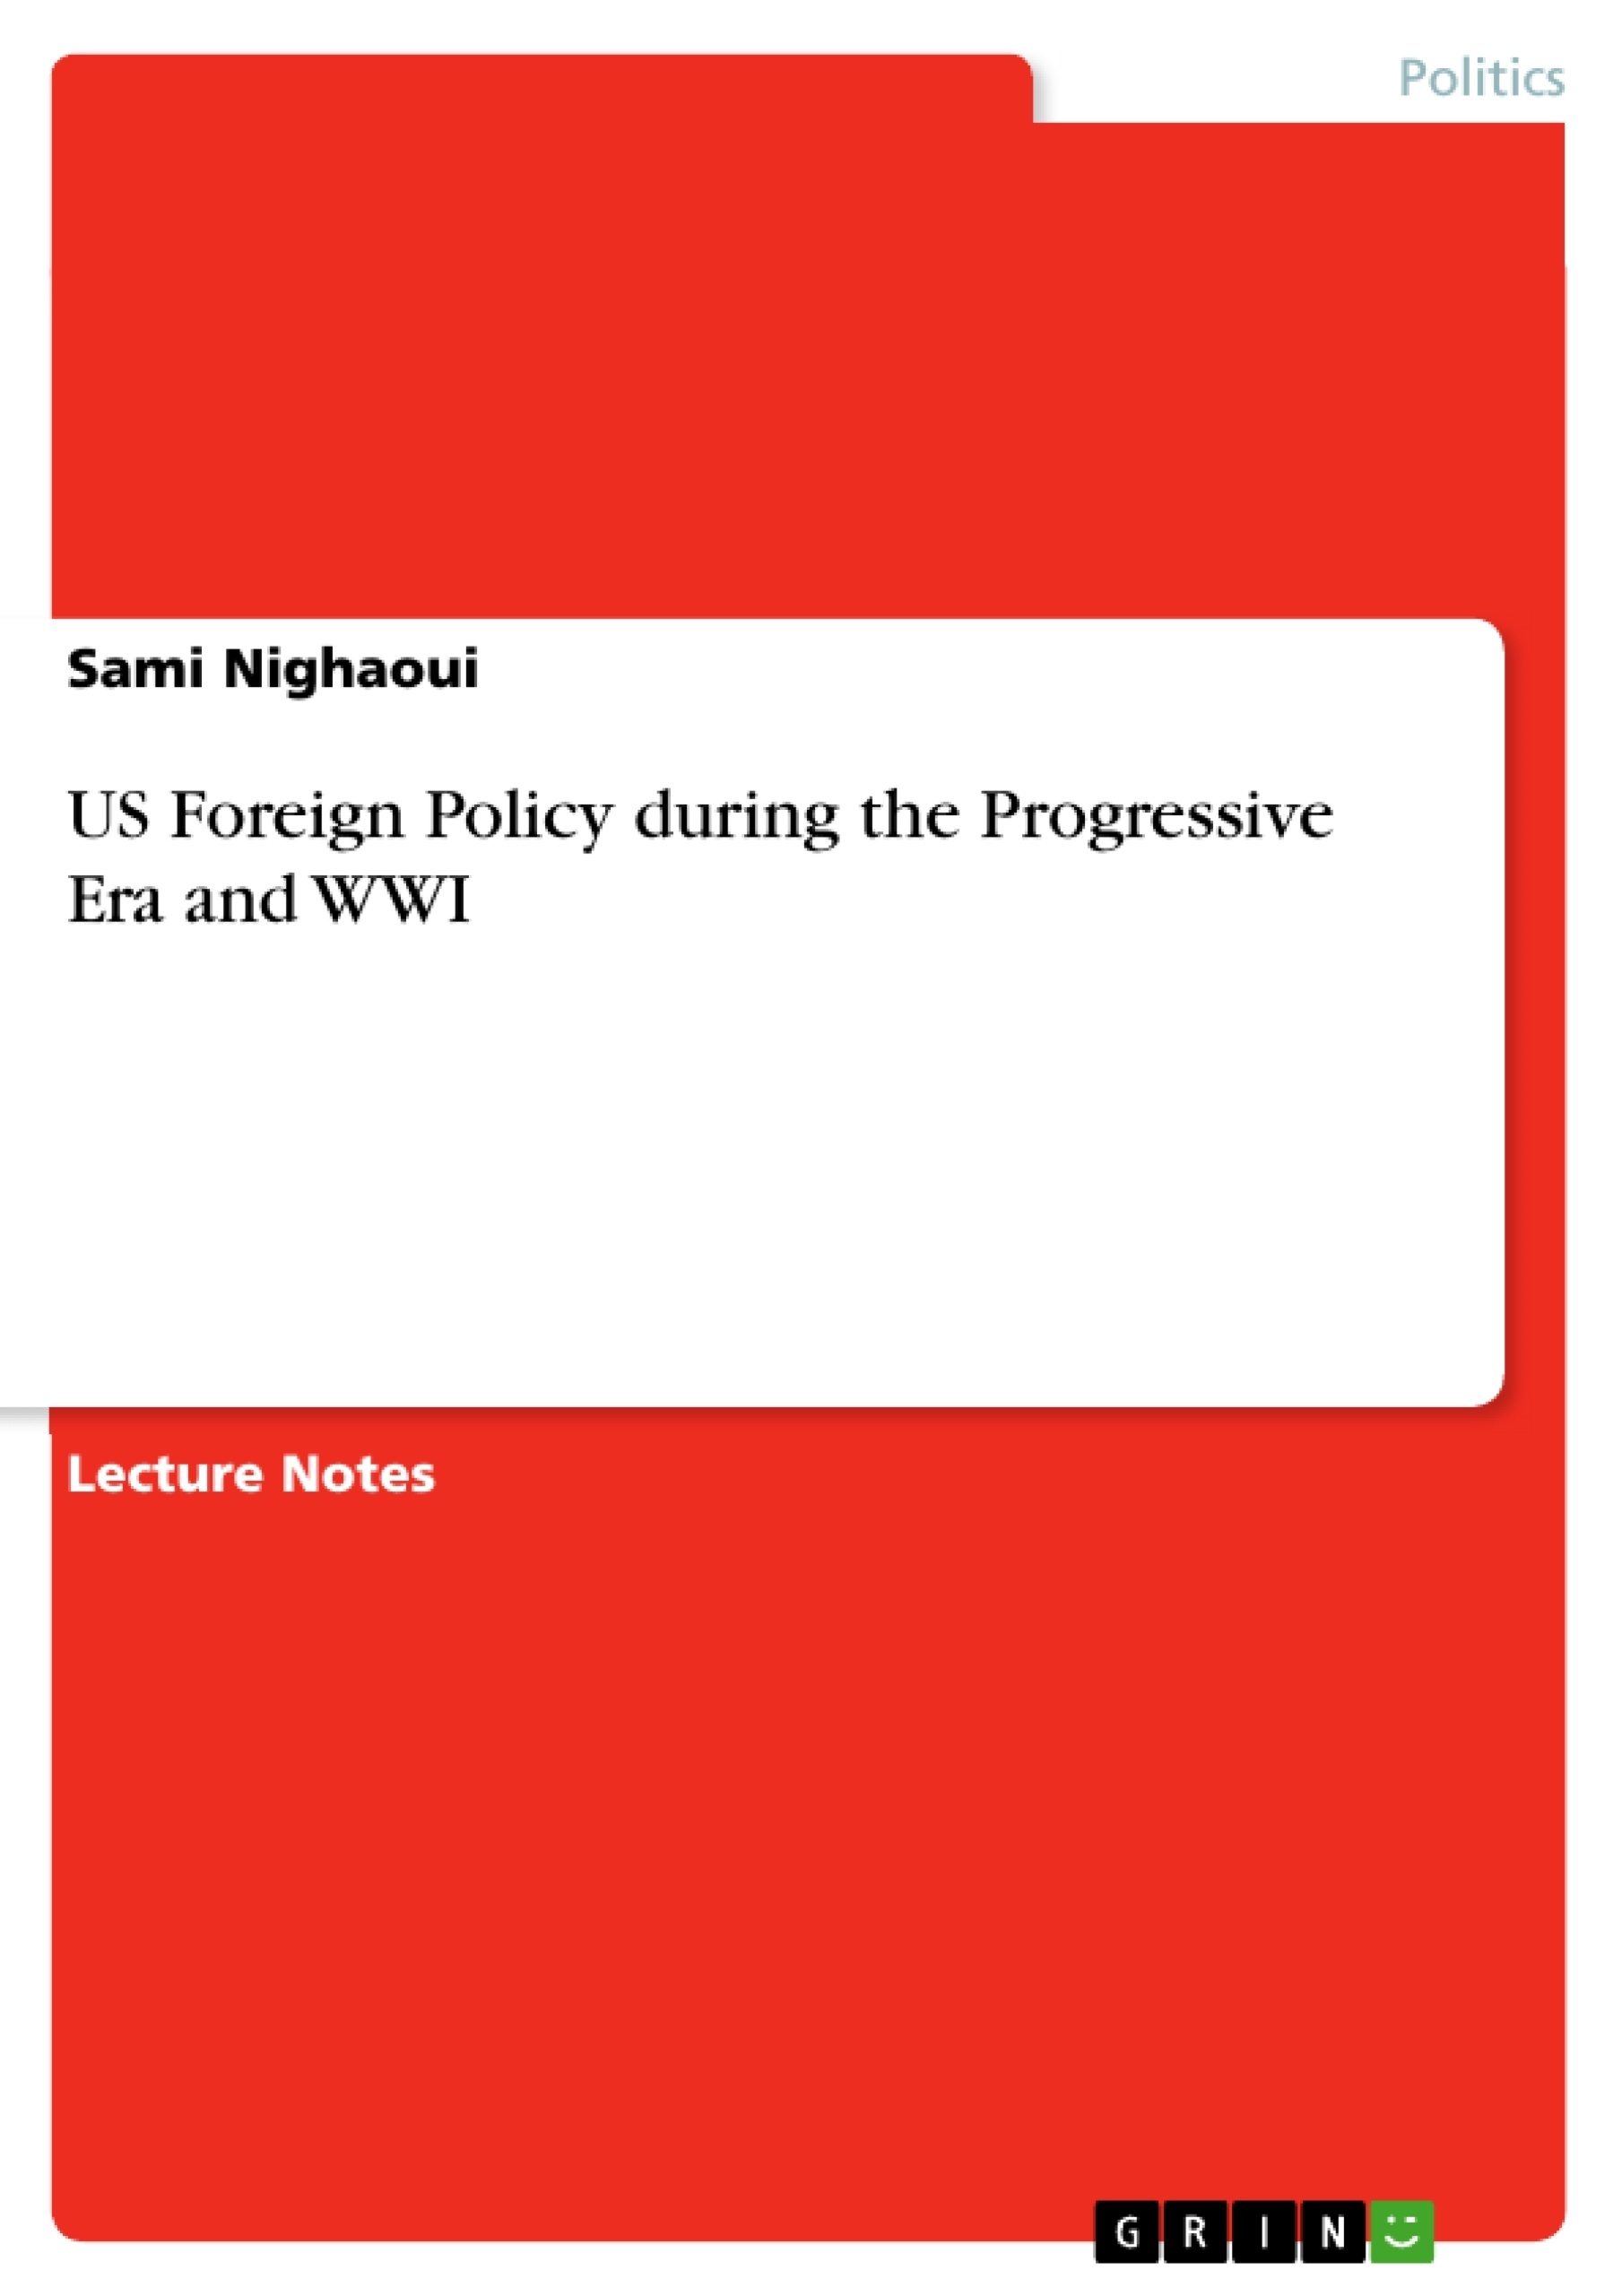 Título: US Foreign Policy during the Progressive Era and WWI